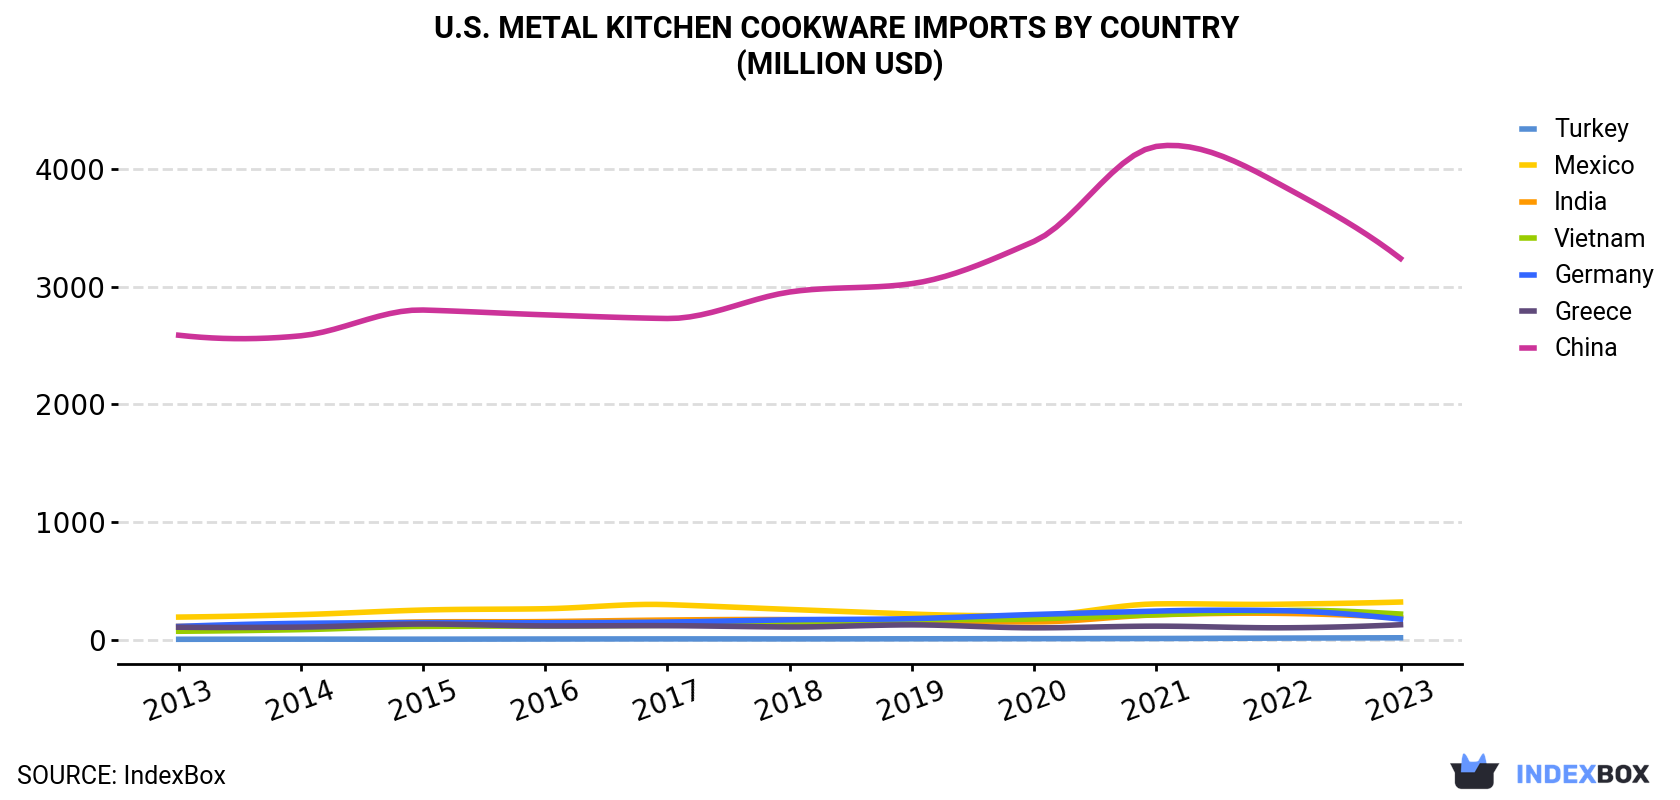 U.S. Metal Kitchen Cookware Imports By Country (Million USD)